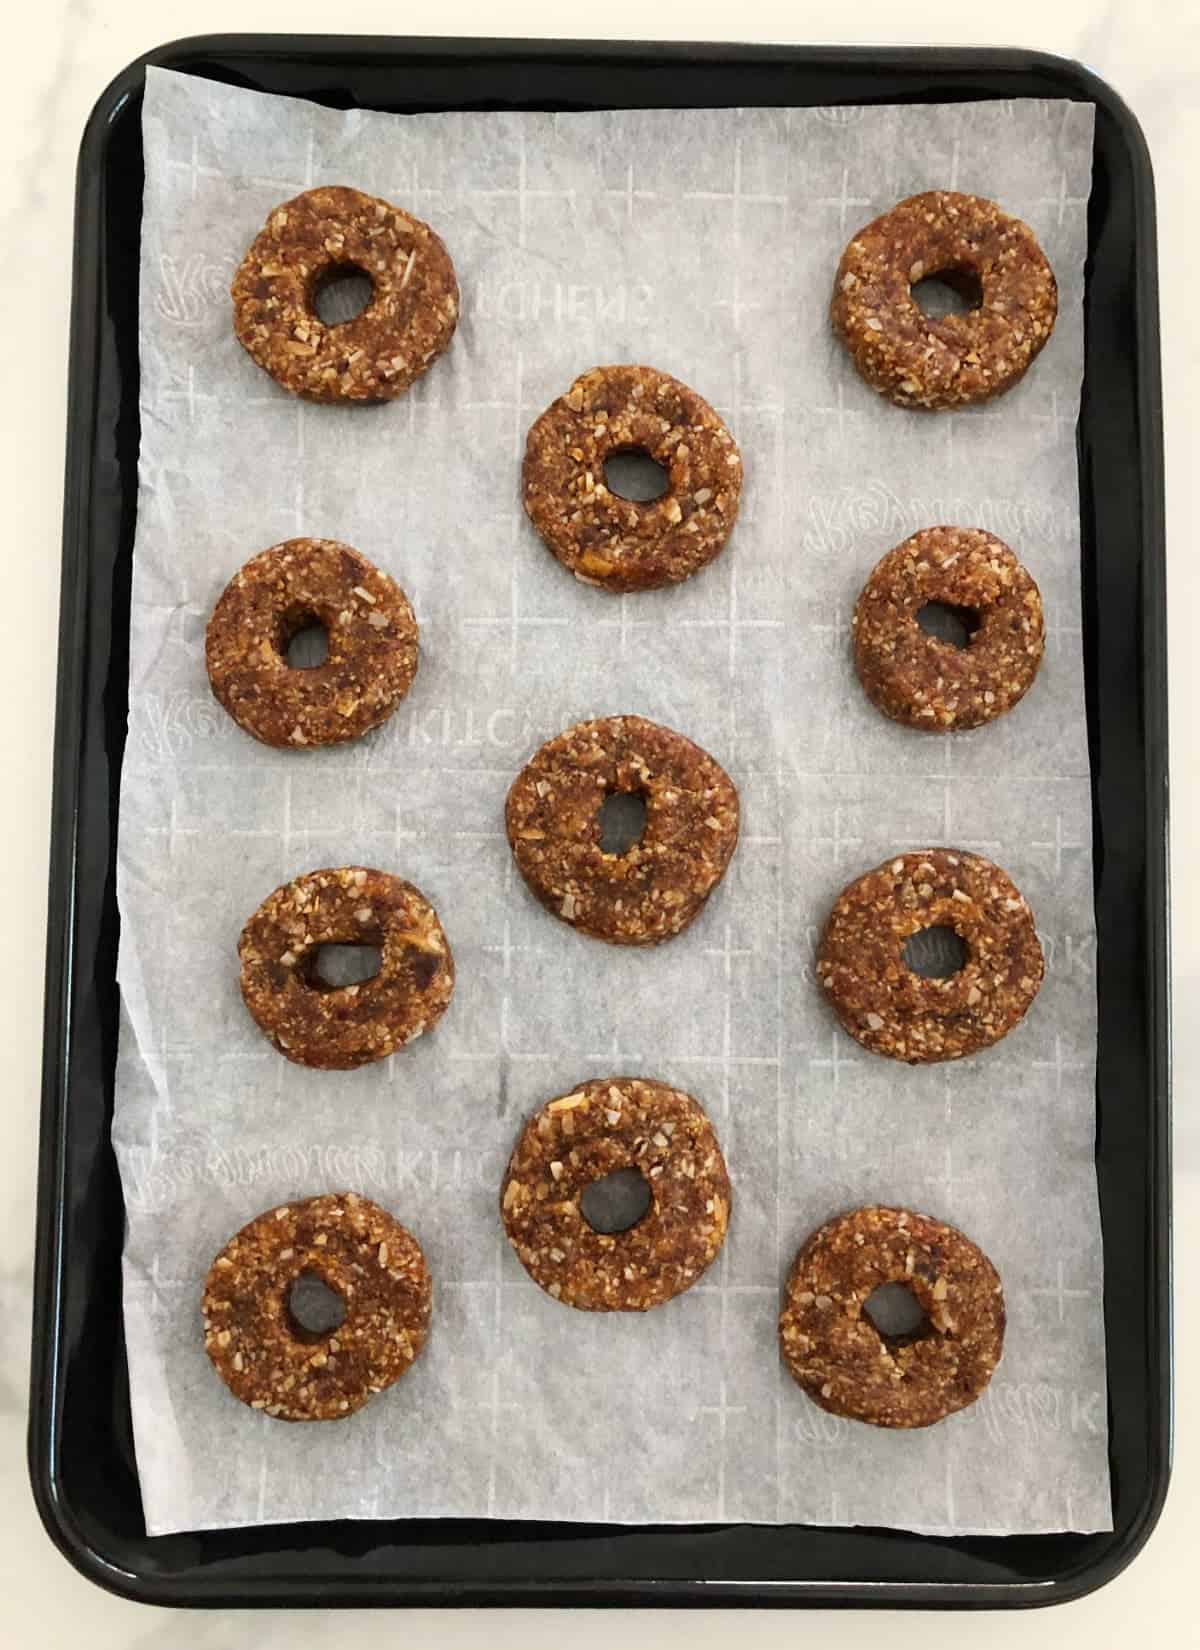 Samoas cookies before dipping in chocolate on parchment lines baking pan.